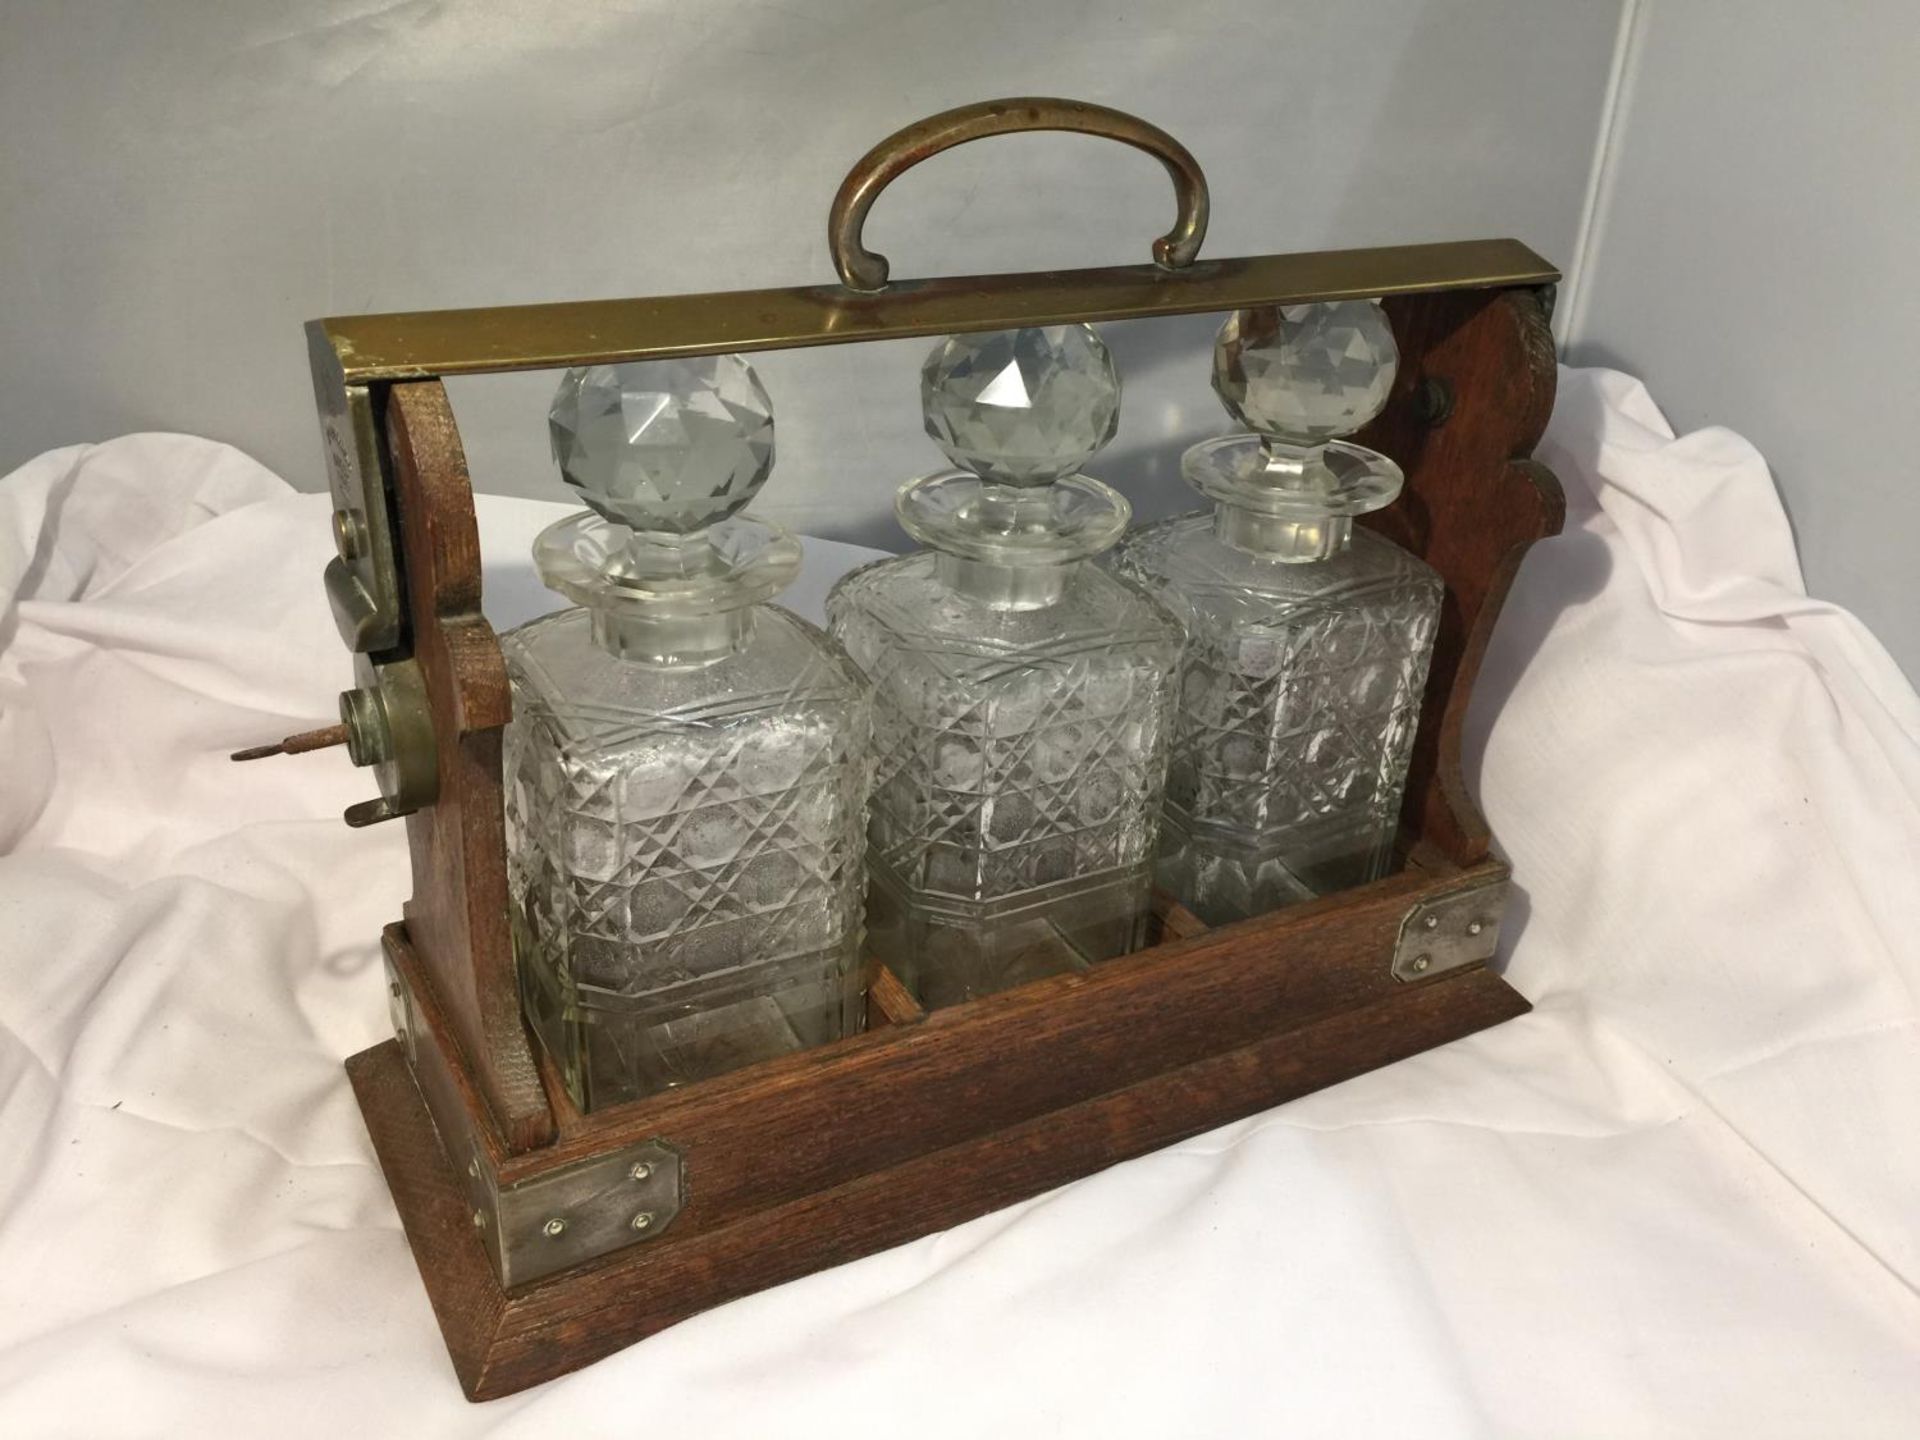 A BETJEMANN LONDON PATENT 62082 OAK FRAMED AND BRASS TANTALUS WITH THREE DECANTERS AND A KEY